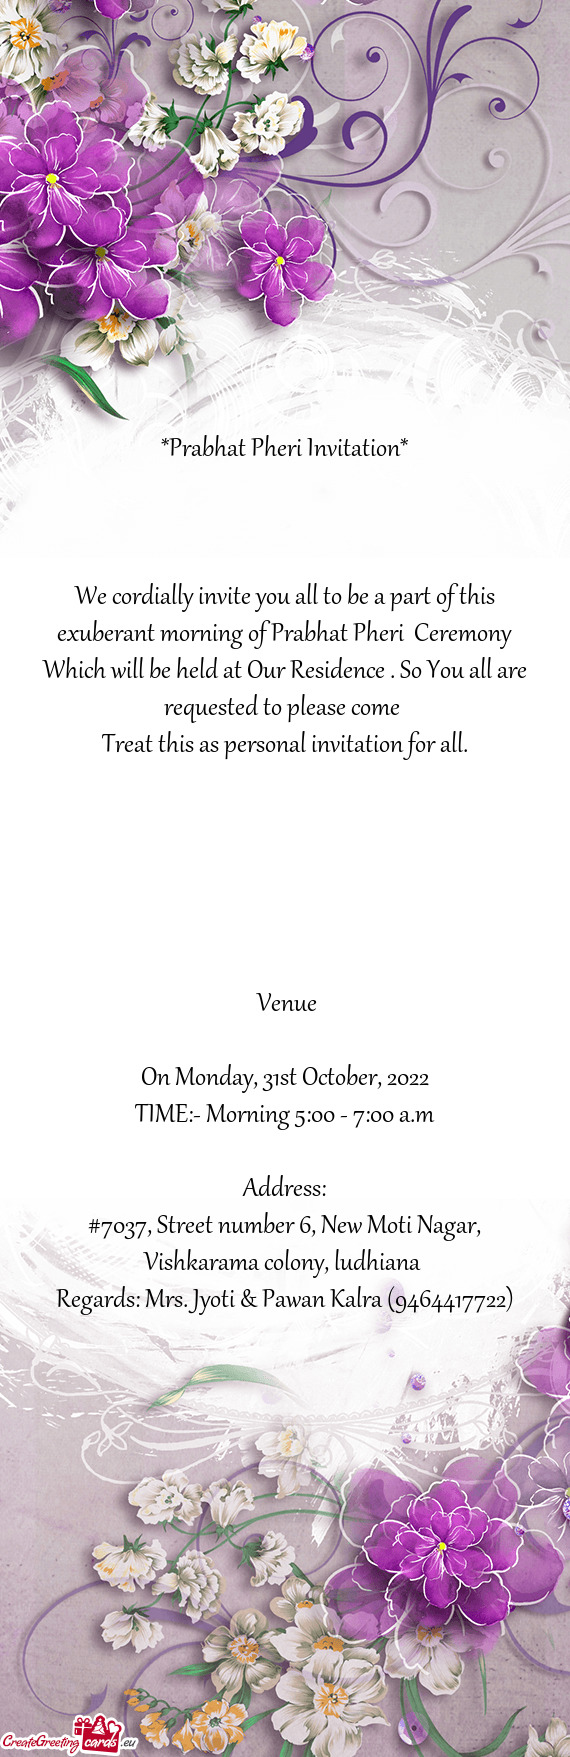 We cordially invite you all to be a part of this exuberant morning of Prabhat Pheri Ceremony Which